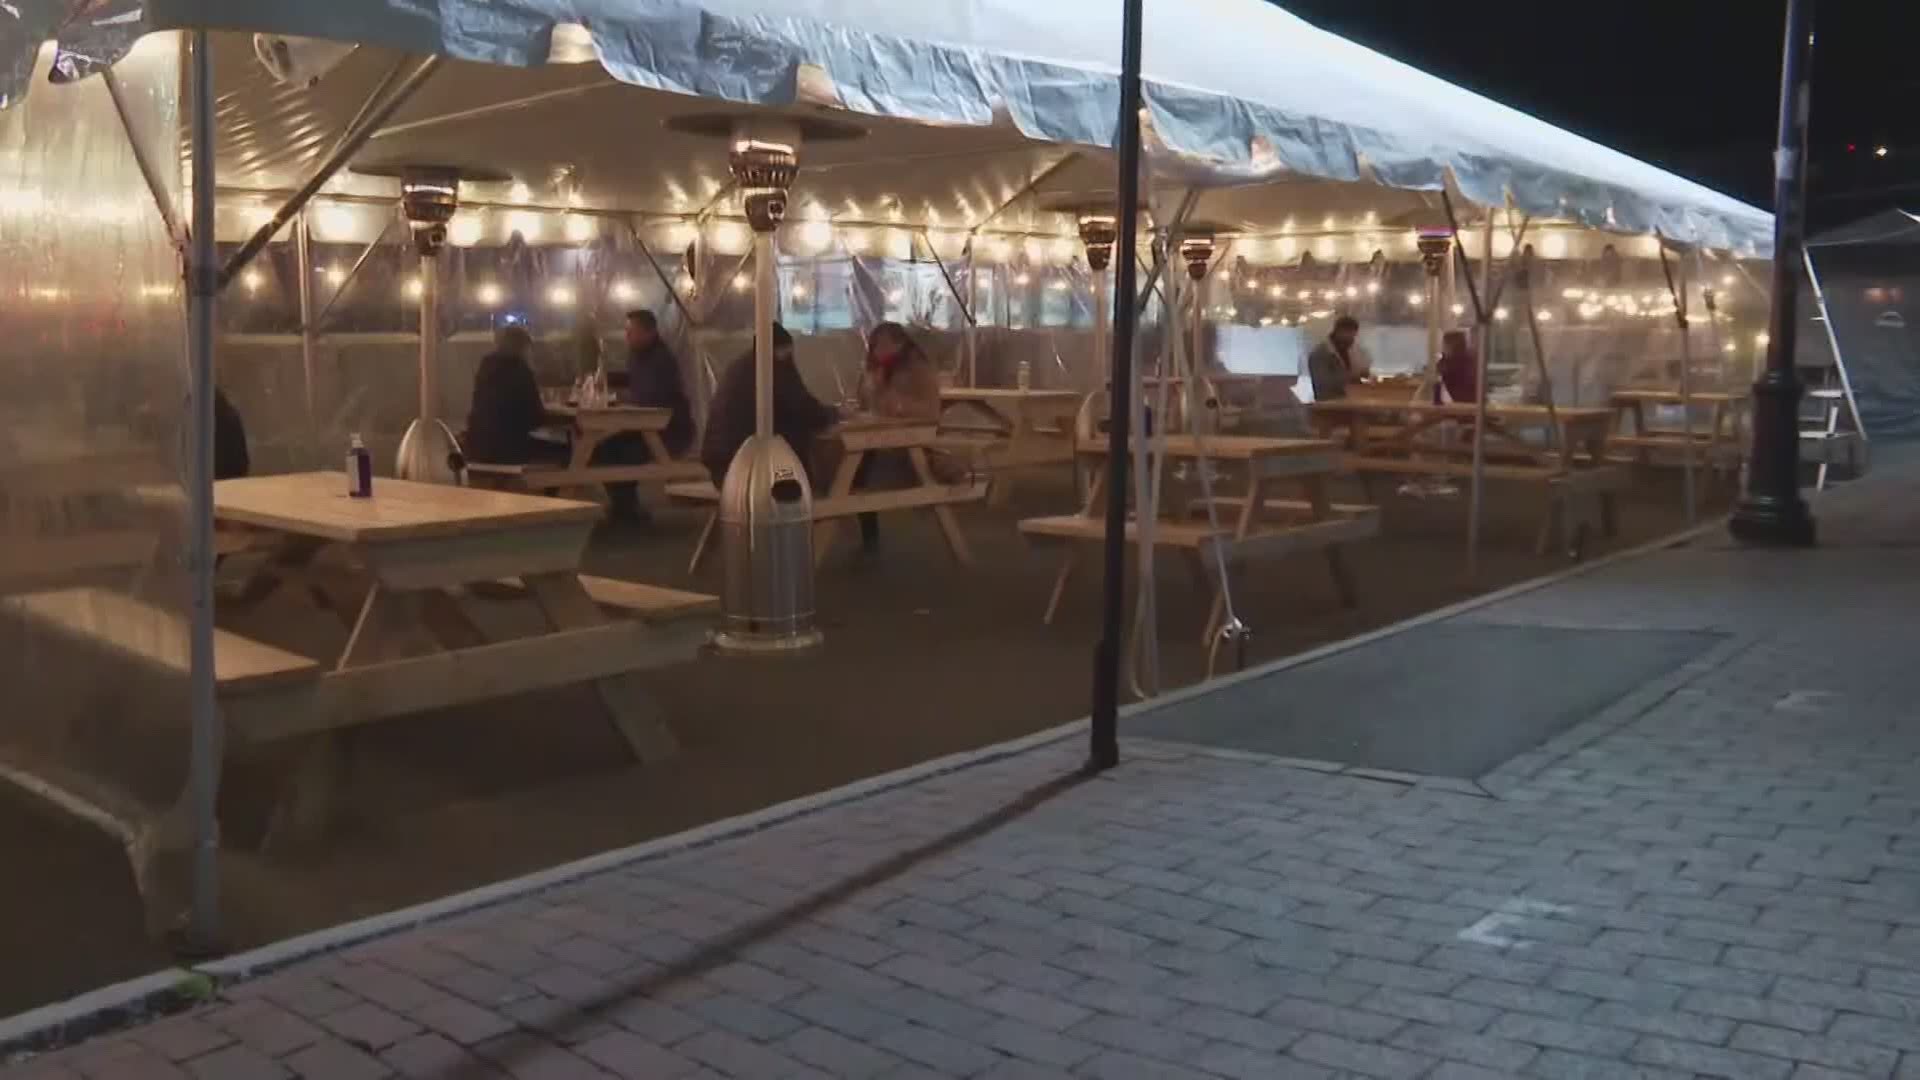 Portland City Council votes to extend outdoor dining to May 10